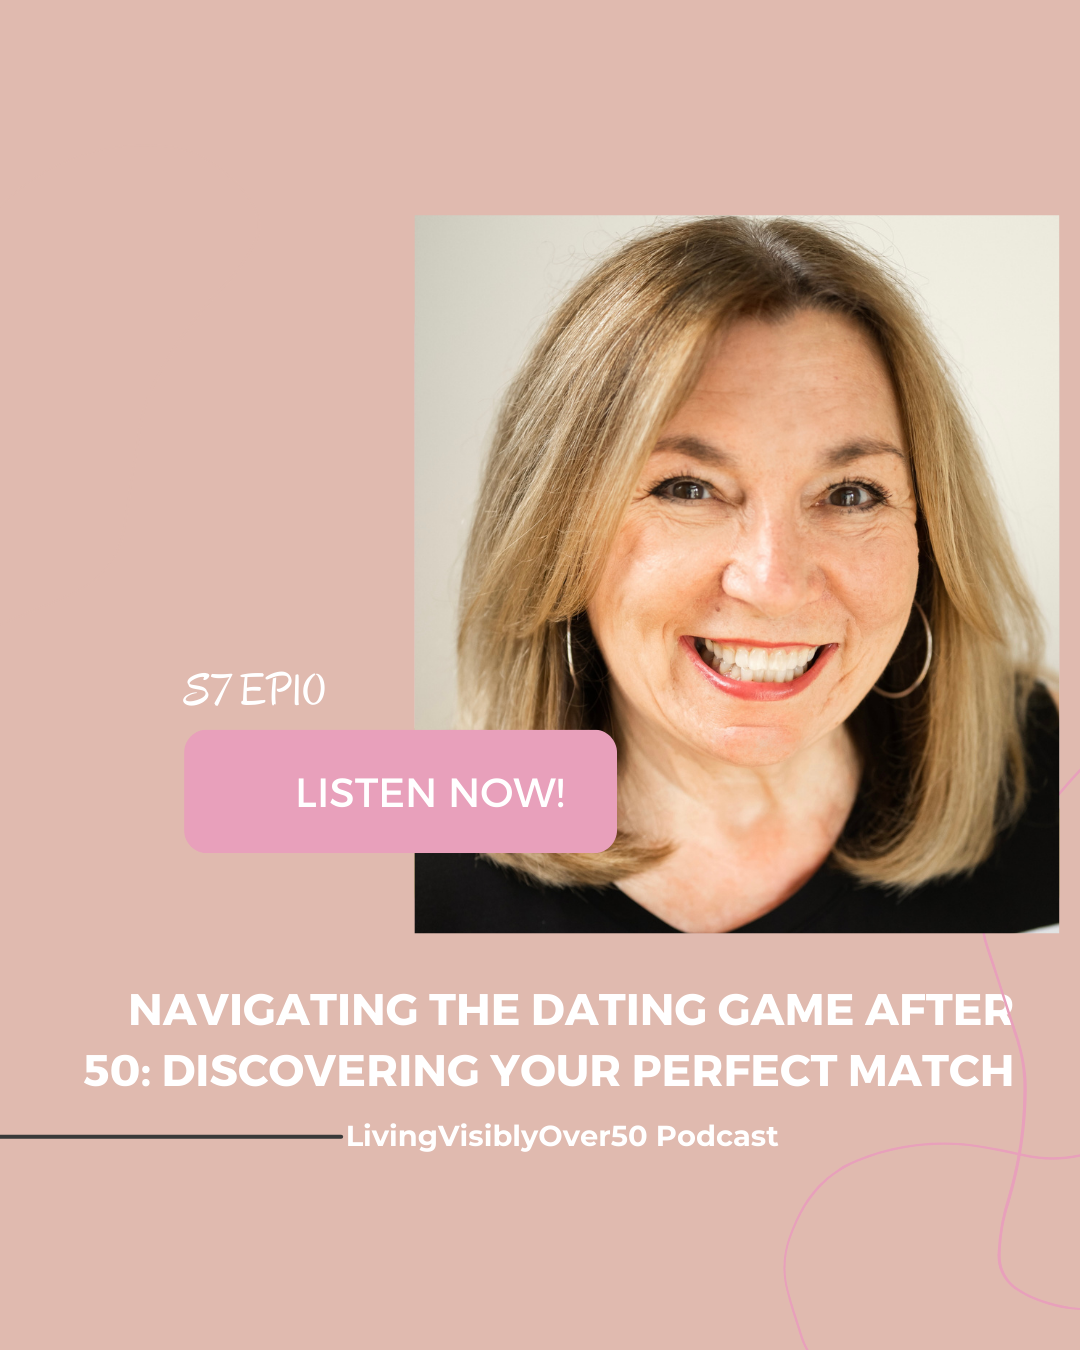 Living Visibly Over 50 podcast. Navigating the Dating Game After 50: Discovering Your Perfect Match.